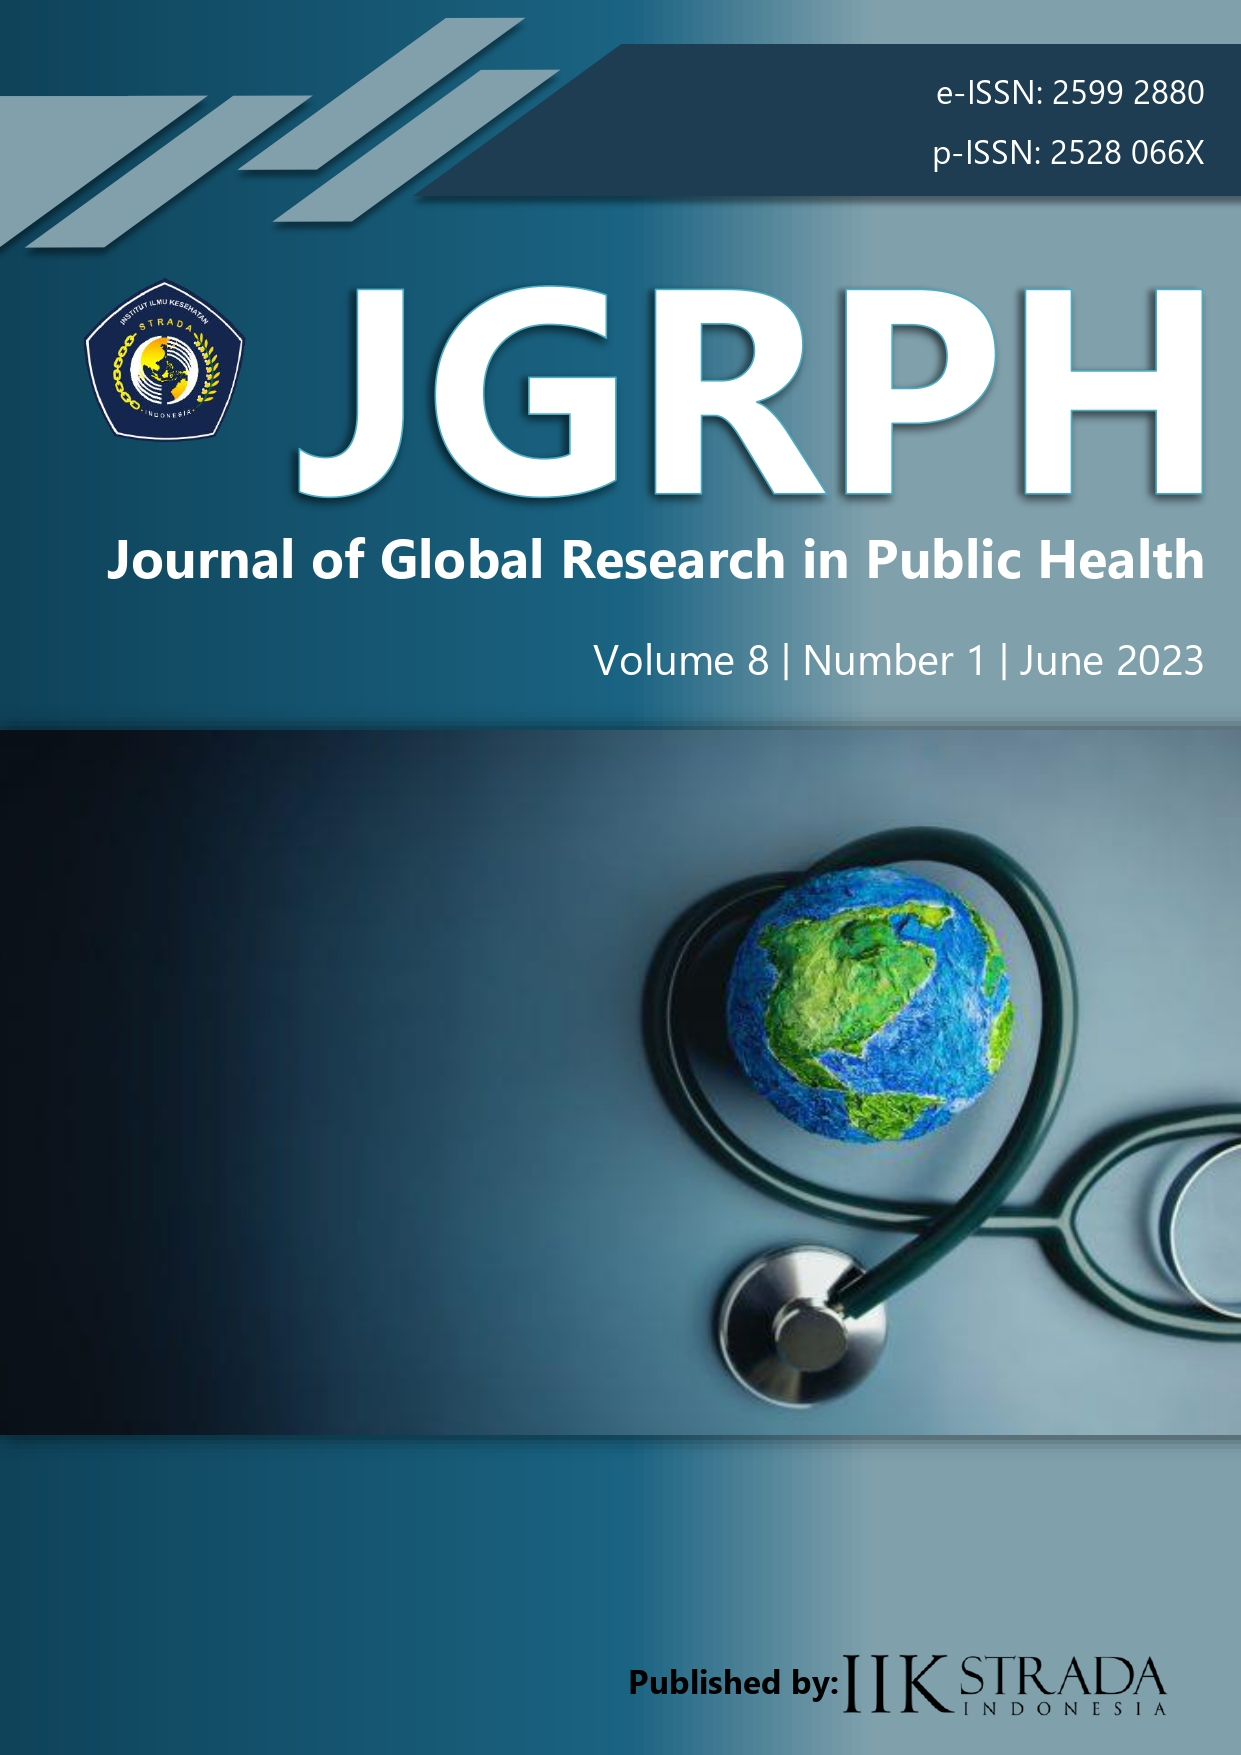 Journal of Global Research in Public Health